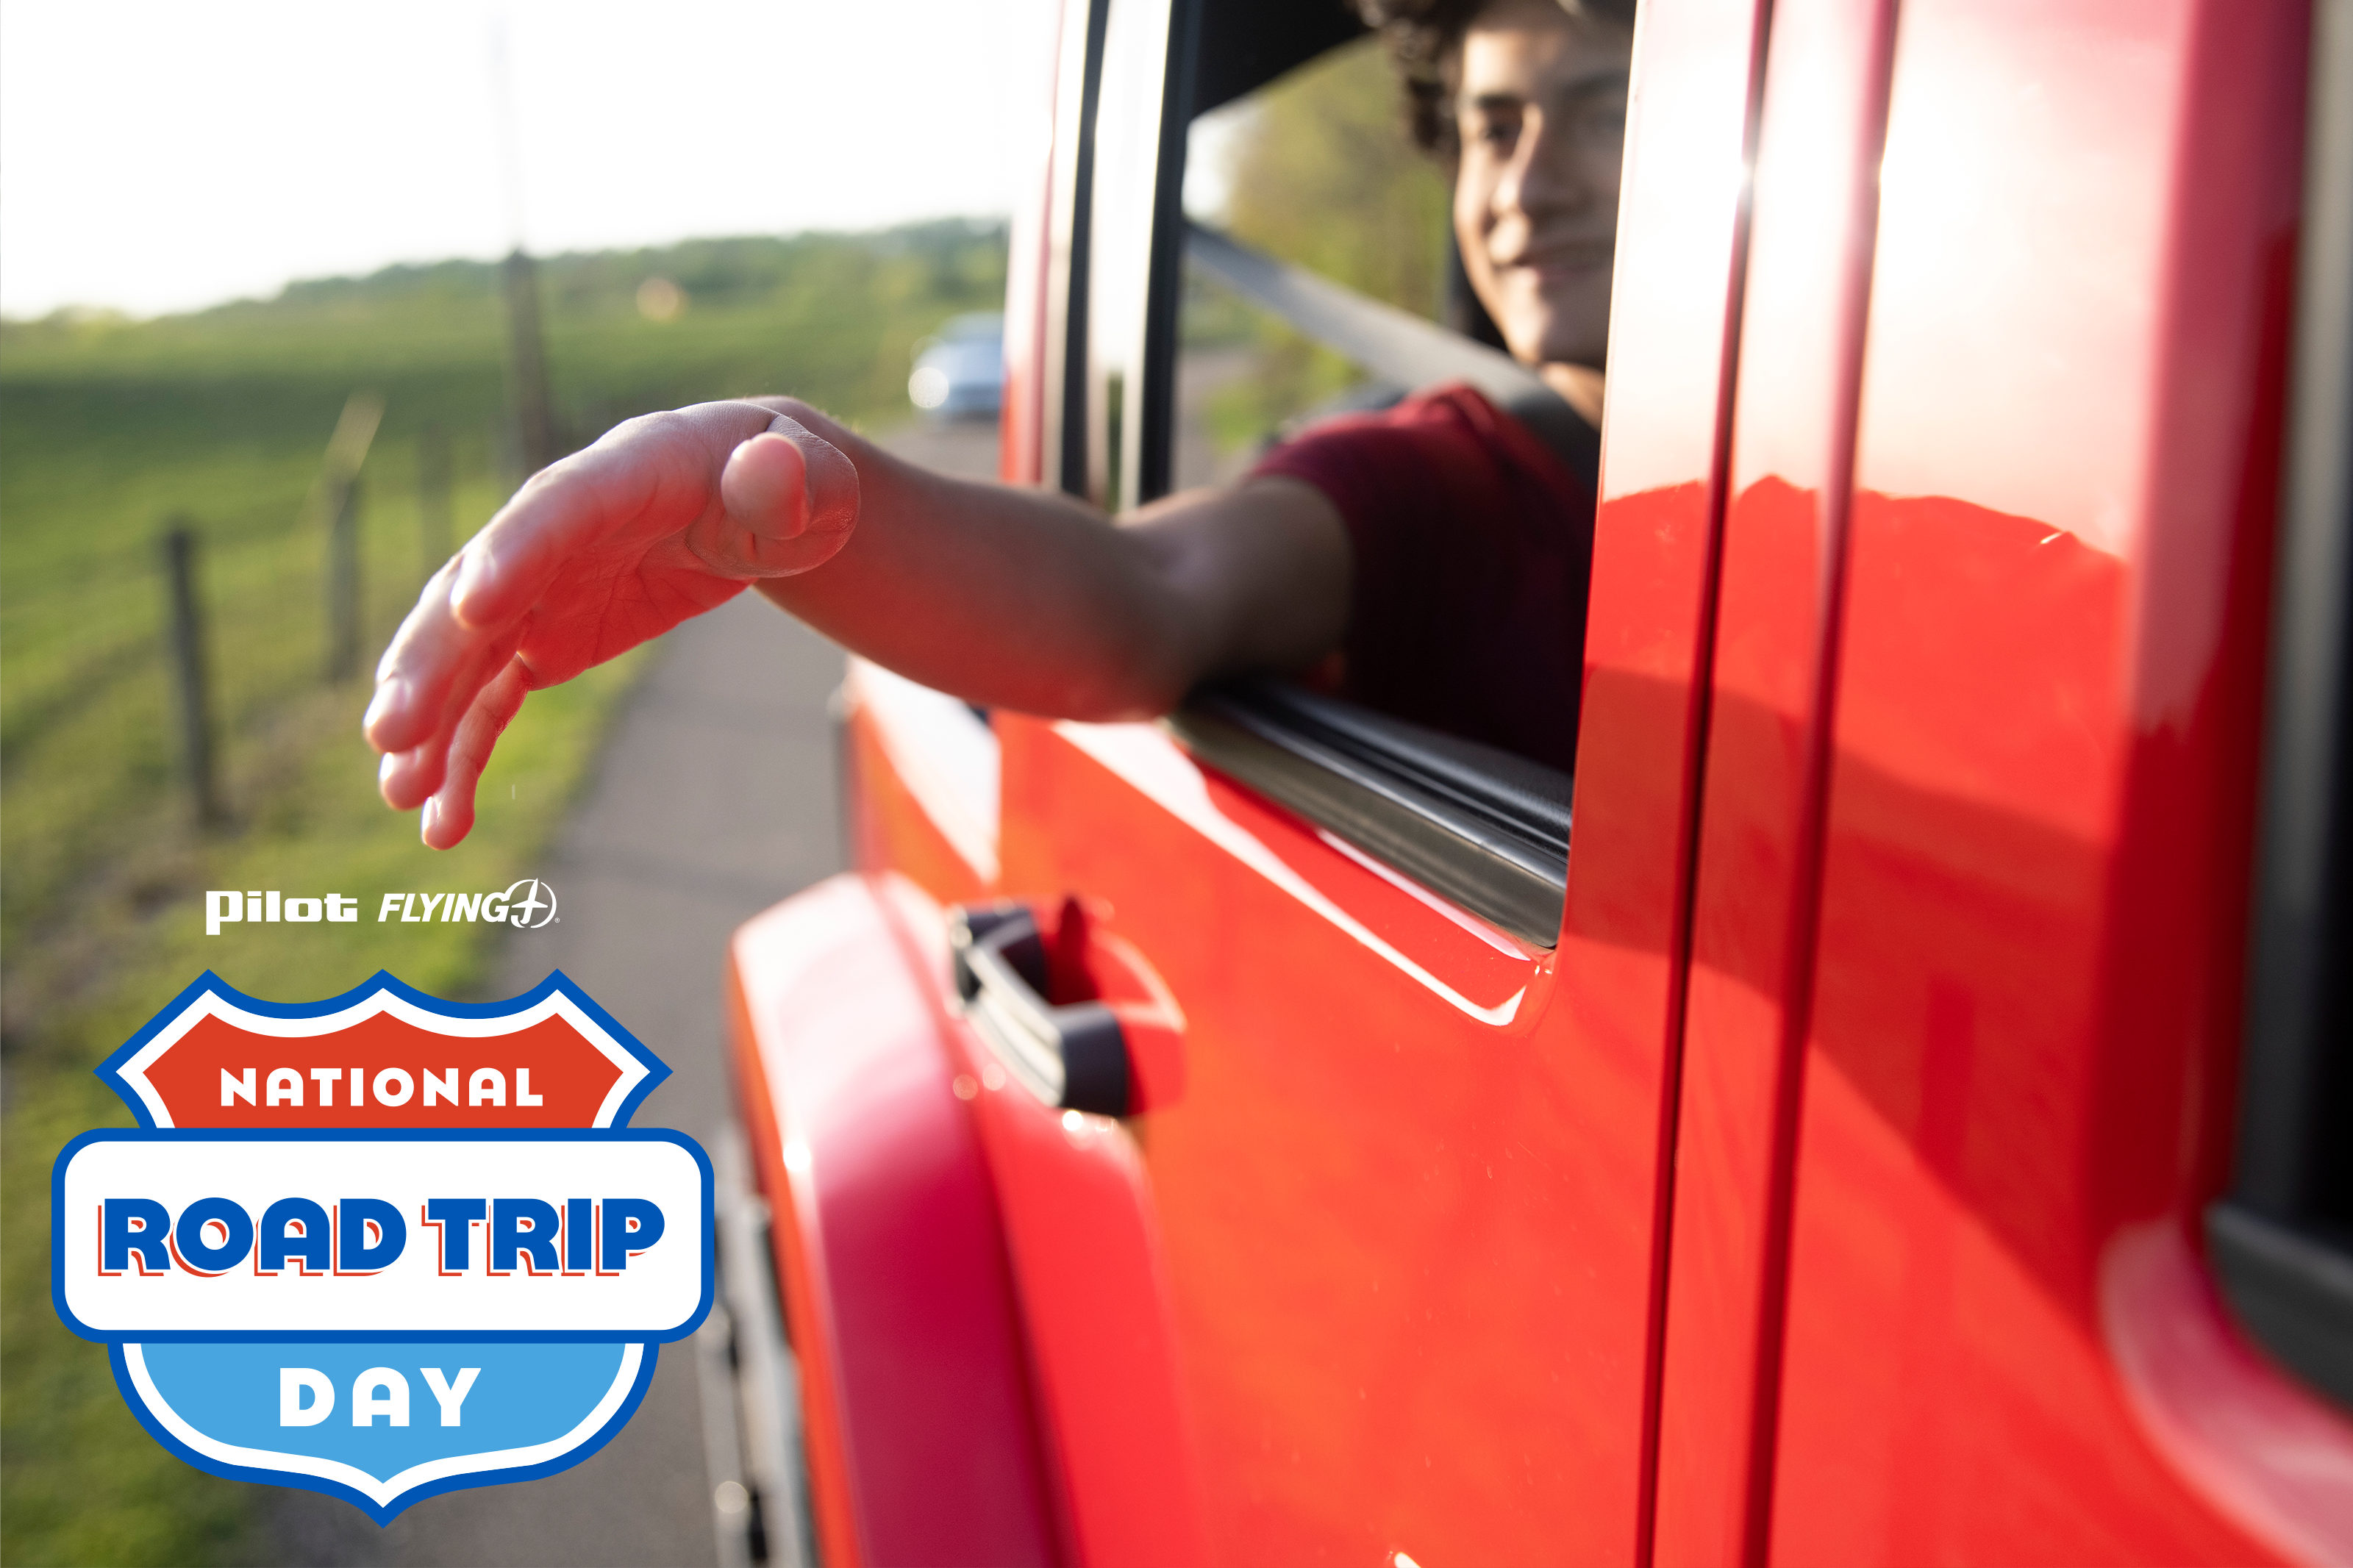 Featured image for “Let the summer times roll with Pilot Flying J’s $50,000 Fuel Giveaway”